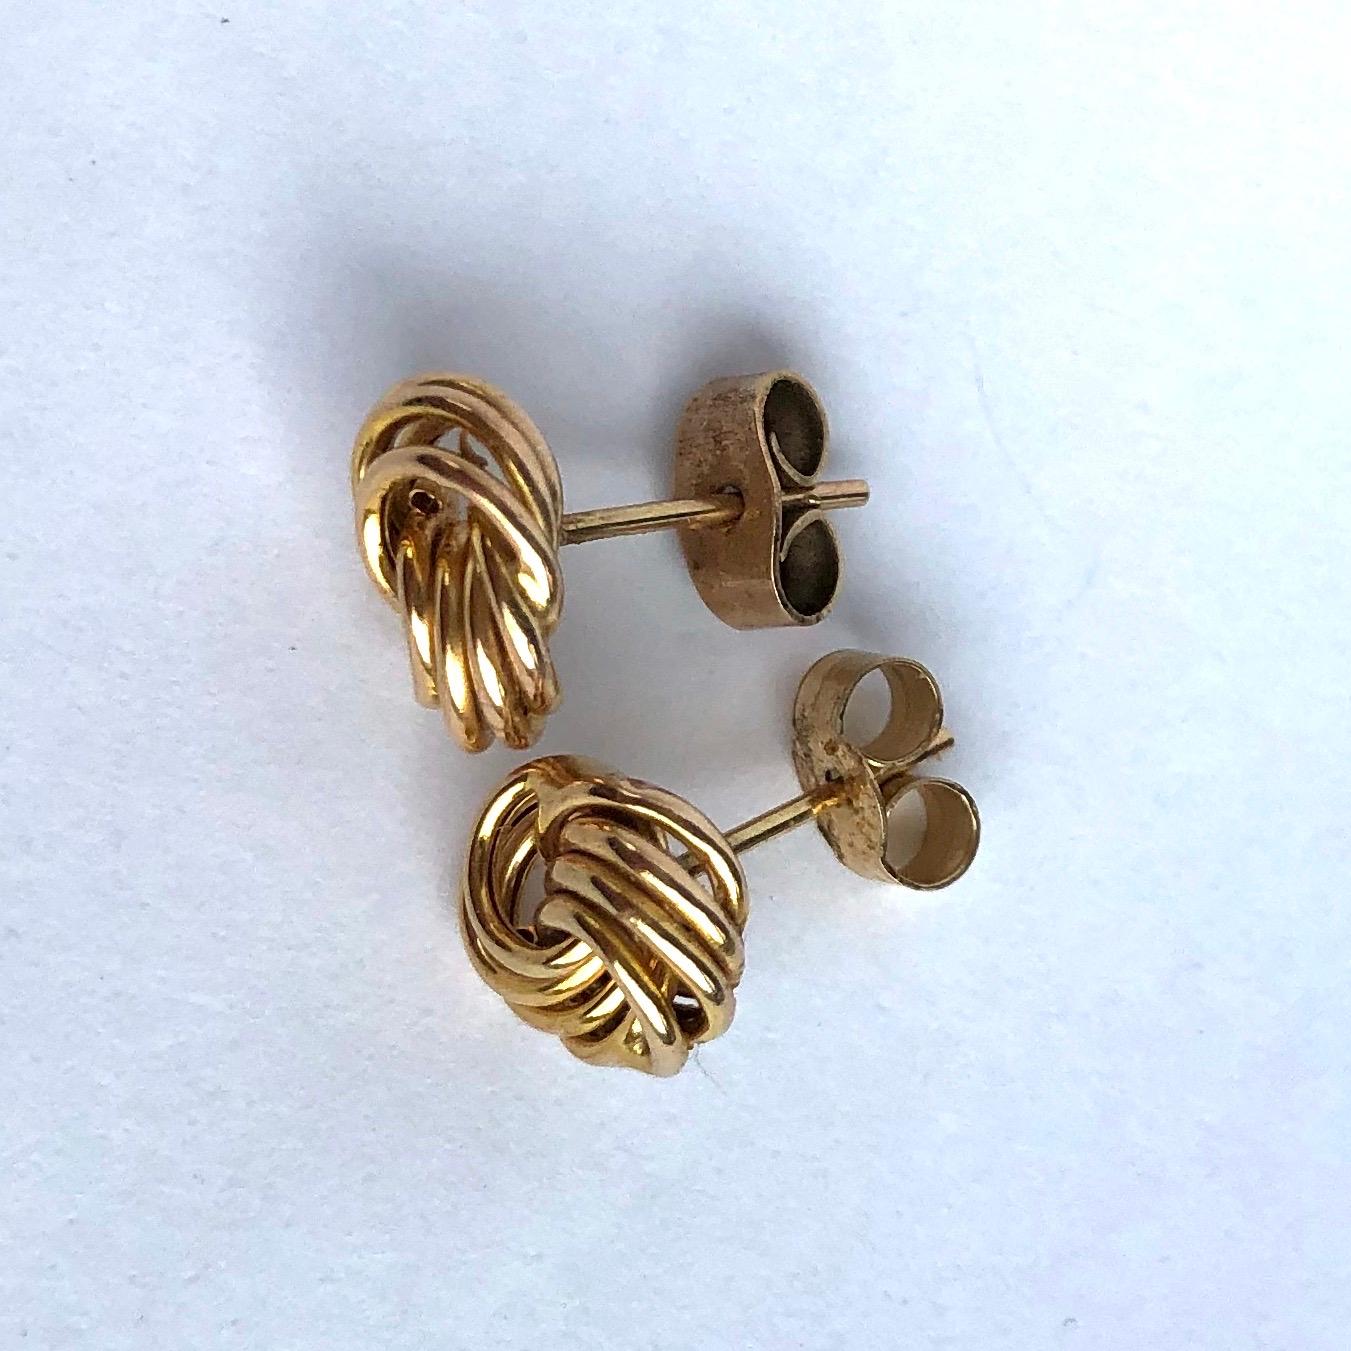 Glossy 9ct yellow gold superbly tied in a knot make the most stylish design for these earrings. The layered hoops have a wonderful sheen to them and make perfect studs. 

Knot Diameter: 9mm
Height From Ear: 4mm

Weight: 0.87g